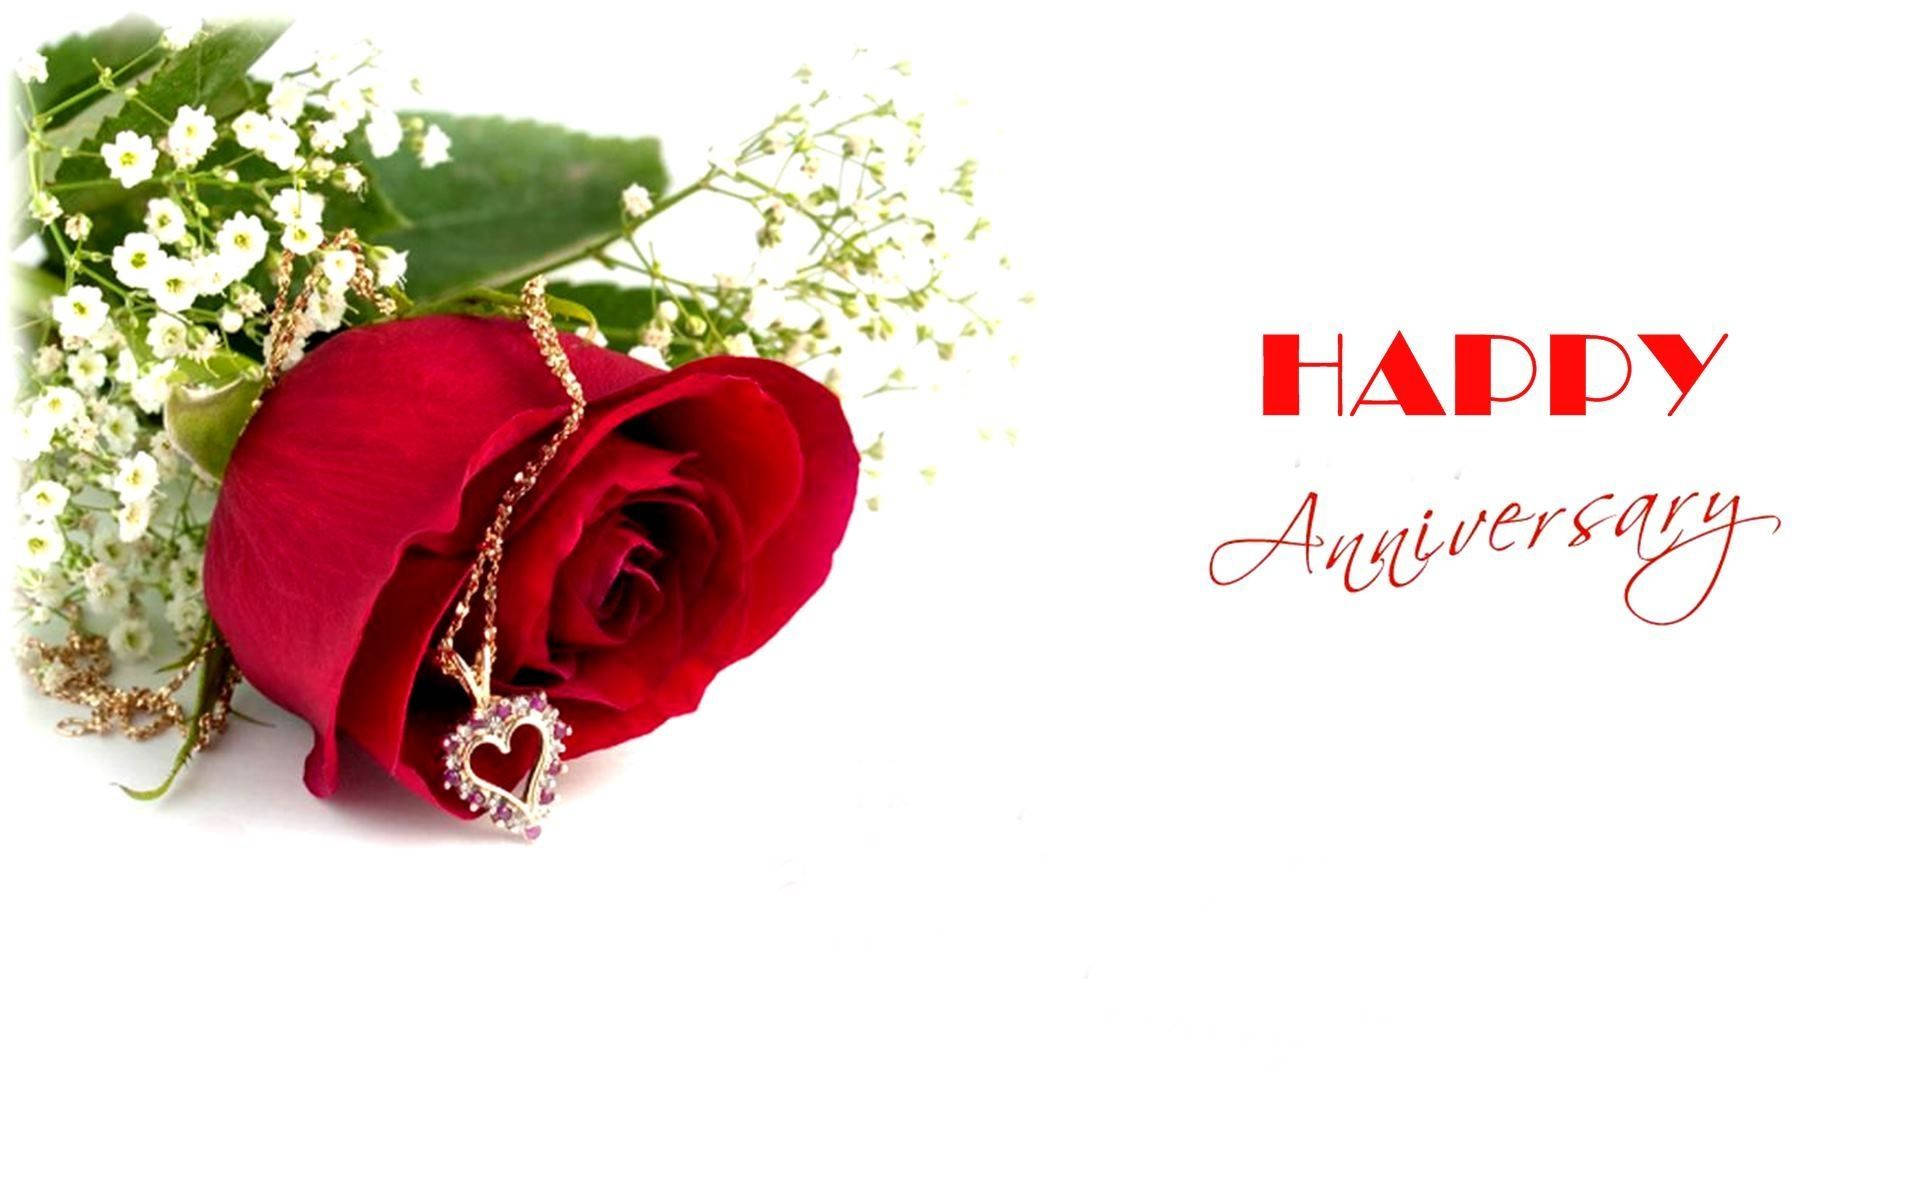 Happy Anniversary Message With Red Rose Background